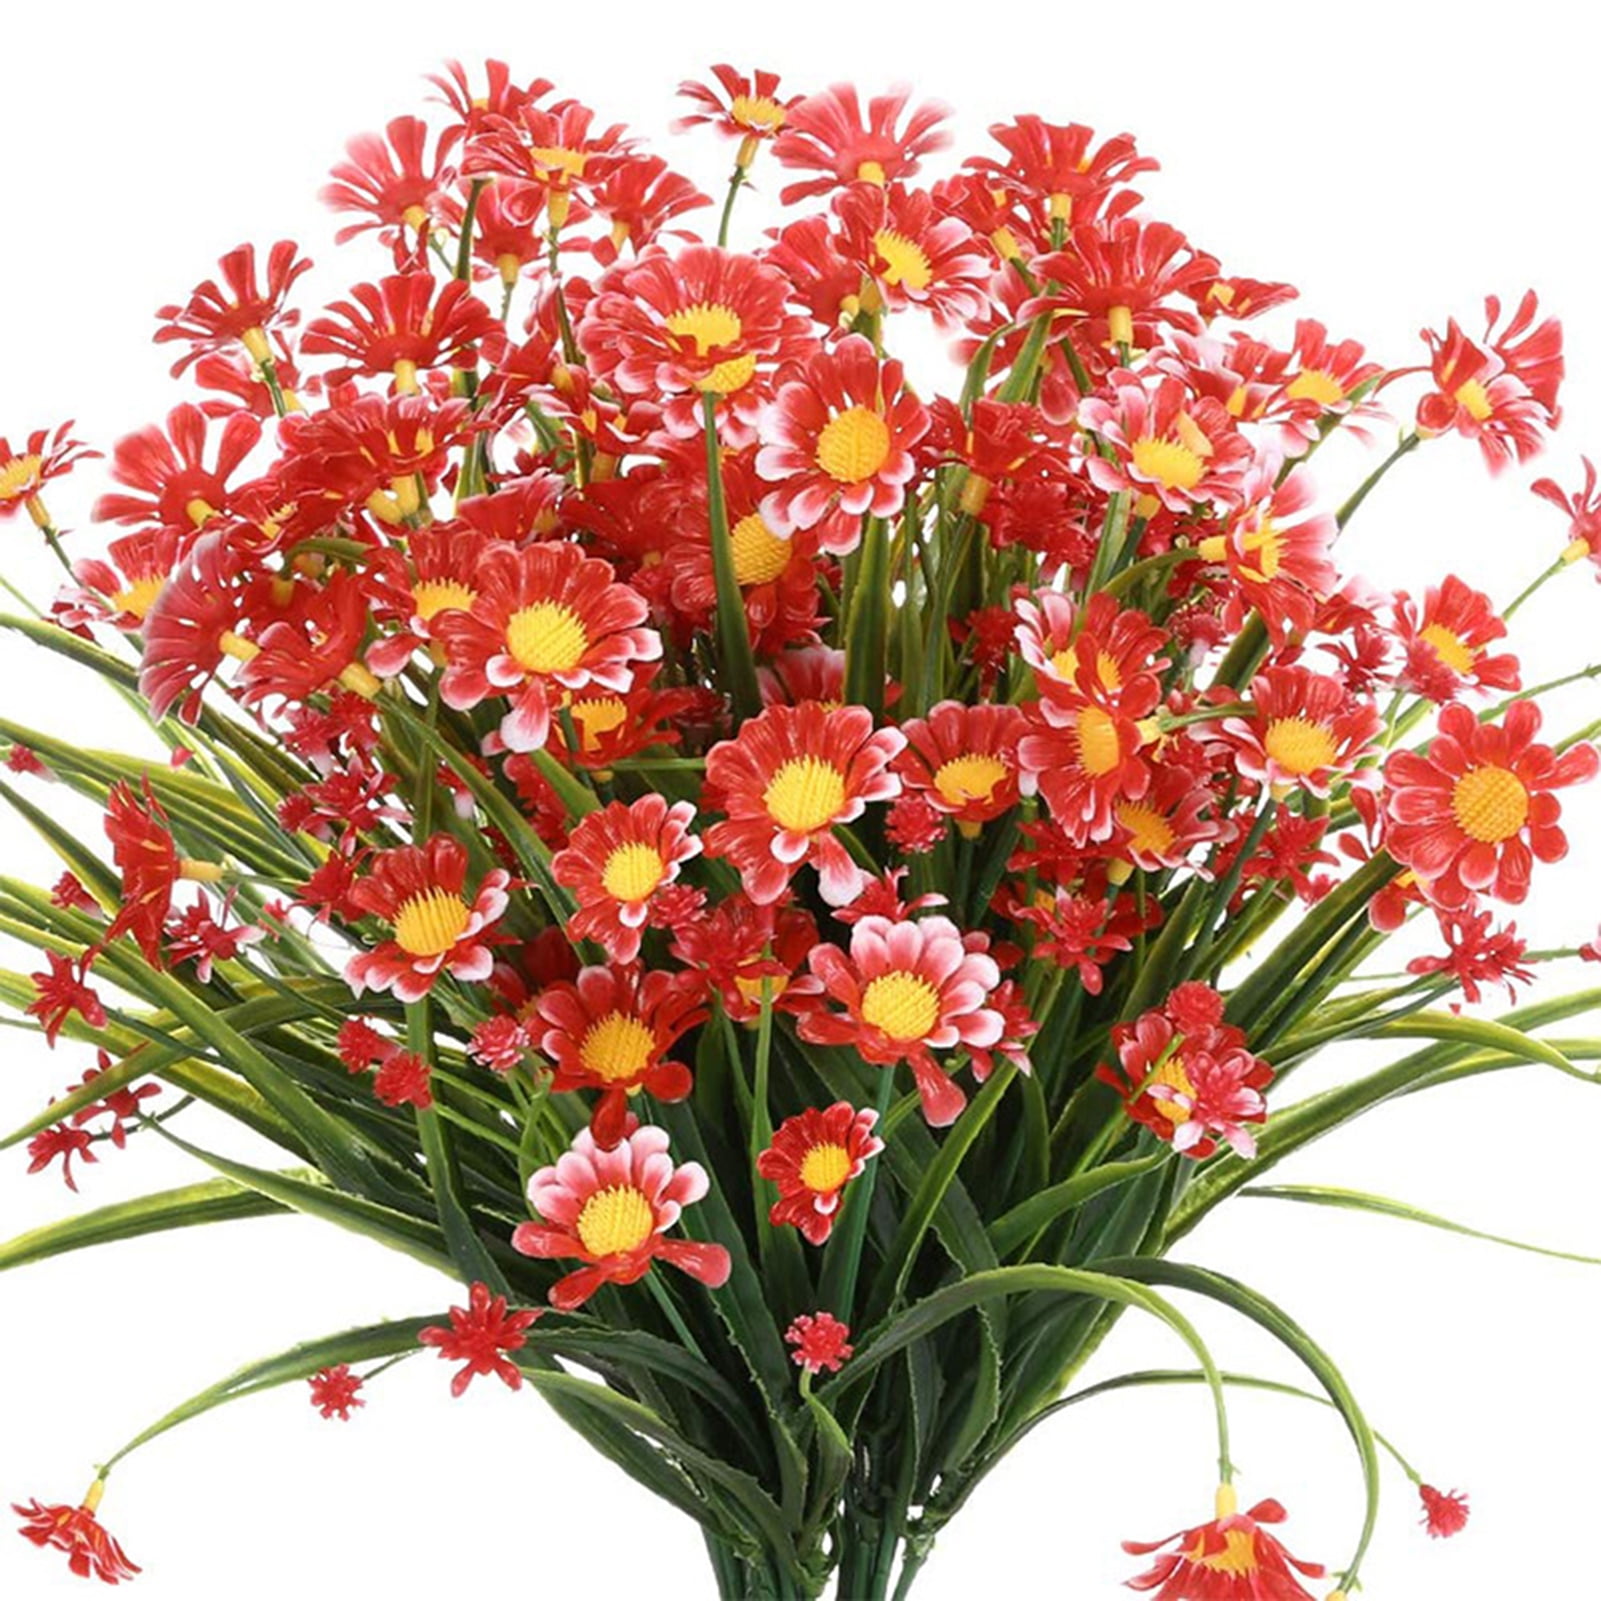  NOV FIRE Artificial Daisies Flowers,Artificial Flowers  Outdoor,8 Bundles UV Resistant Faux Flowers Outdoor,Fake Plastic Flowers  Shrubs for Indoor Outside Decor(Orange Red) : Home & Kitchen